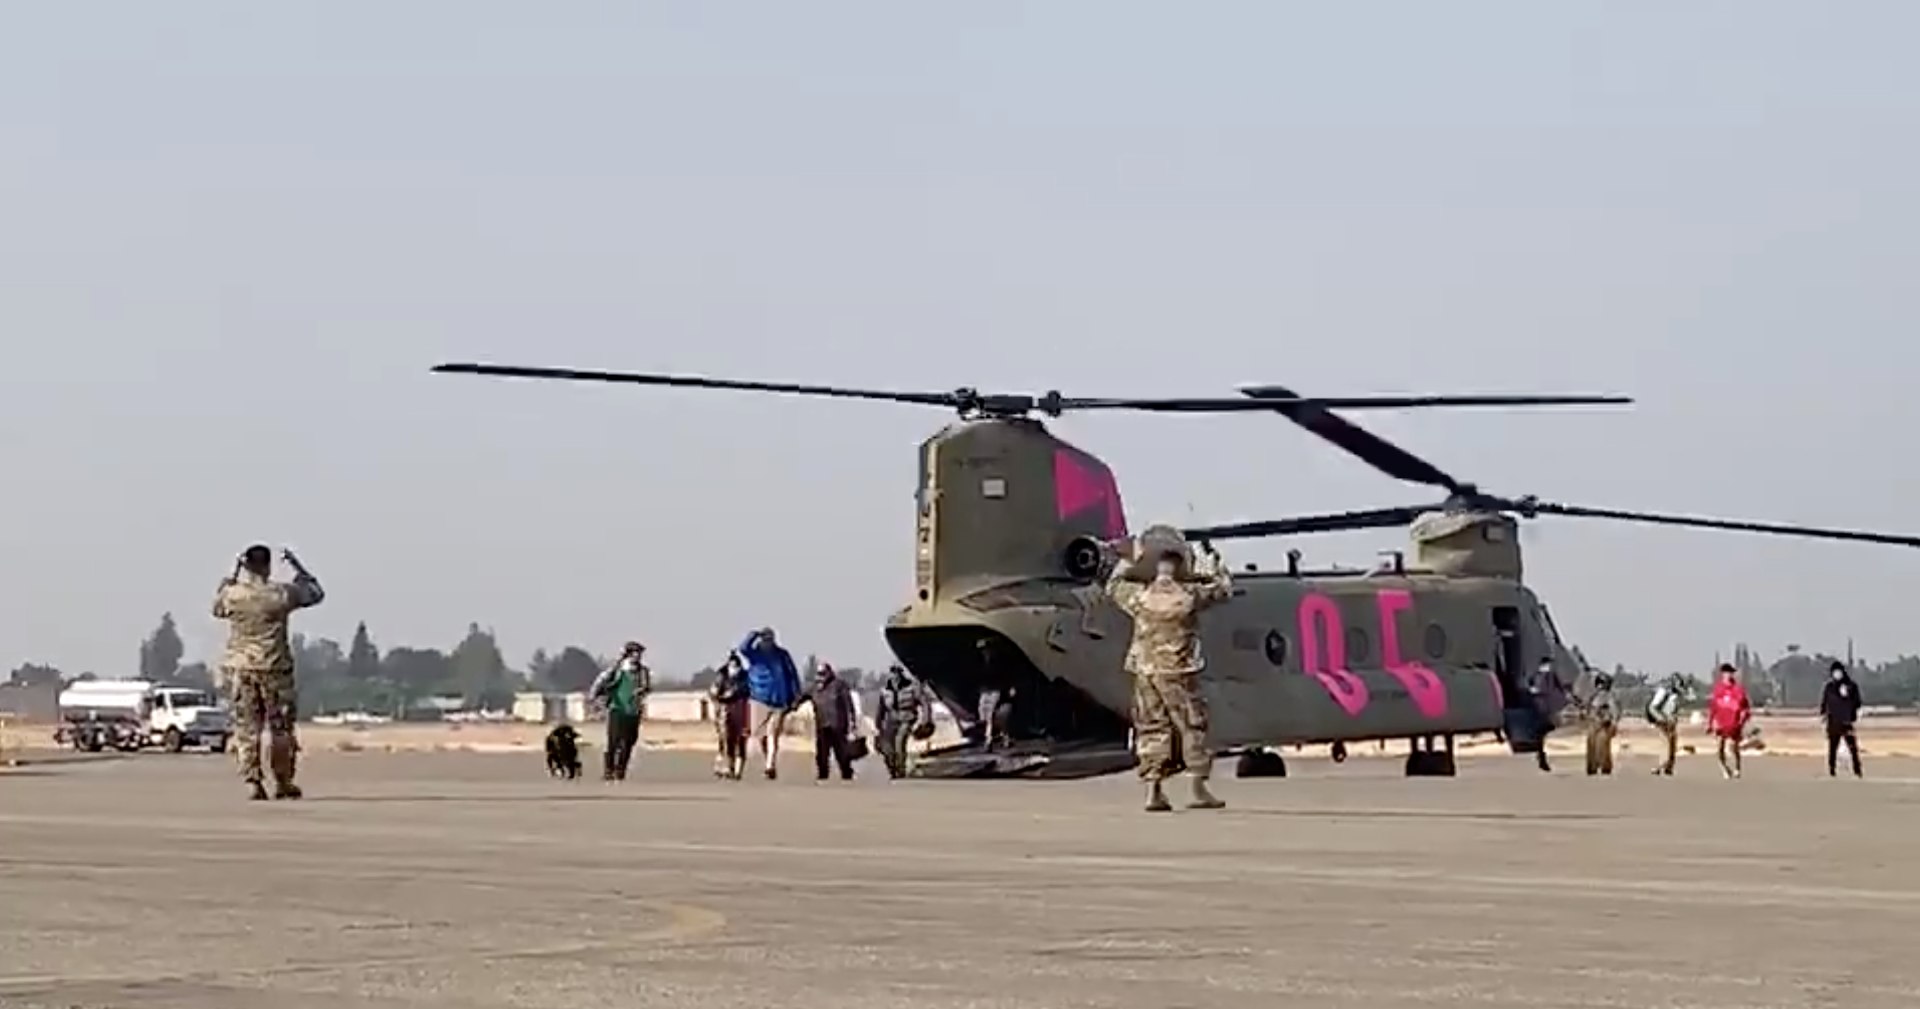 46 people and four dogs arriving at the Fresno Yosemite International Airport after being rescued from Lake Edison by a Stockton-based Cal Guard CH-47 Chinook helicopter. (Courtesy Department of Defense)